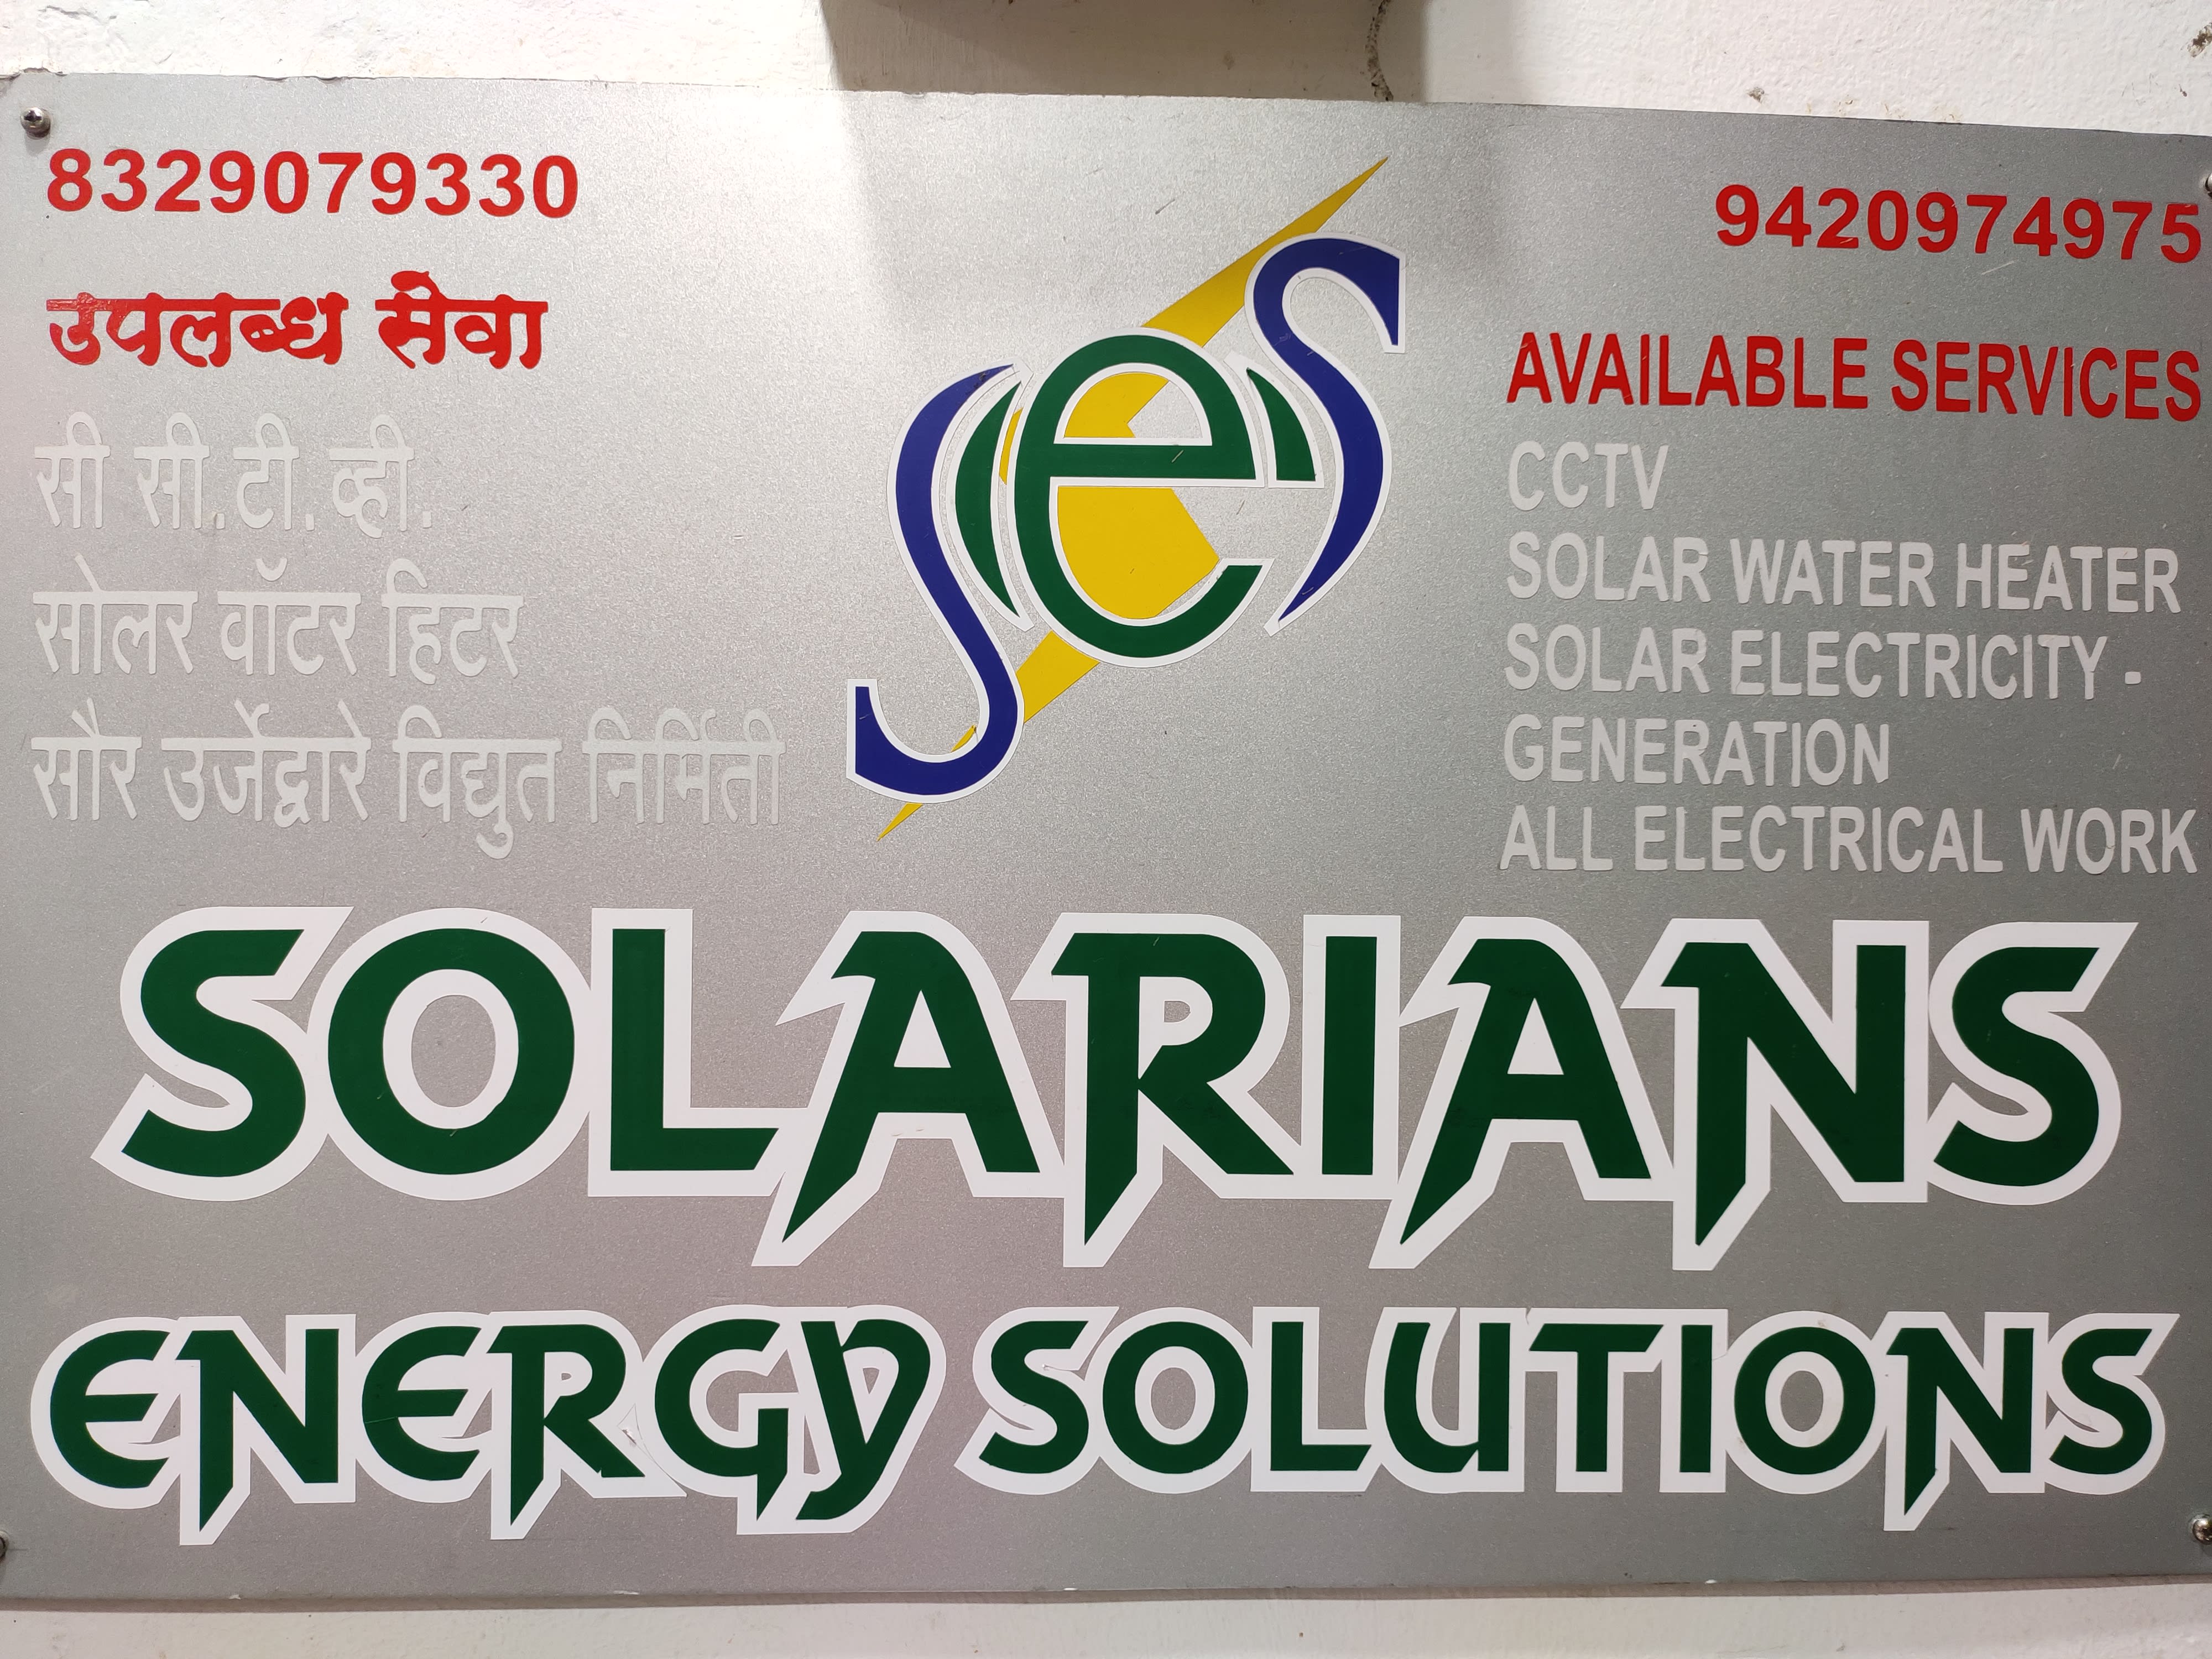 Solarians Energy Solutions